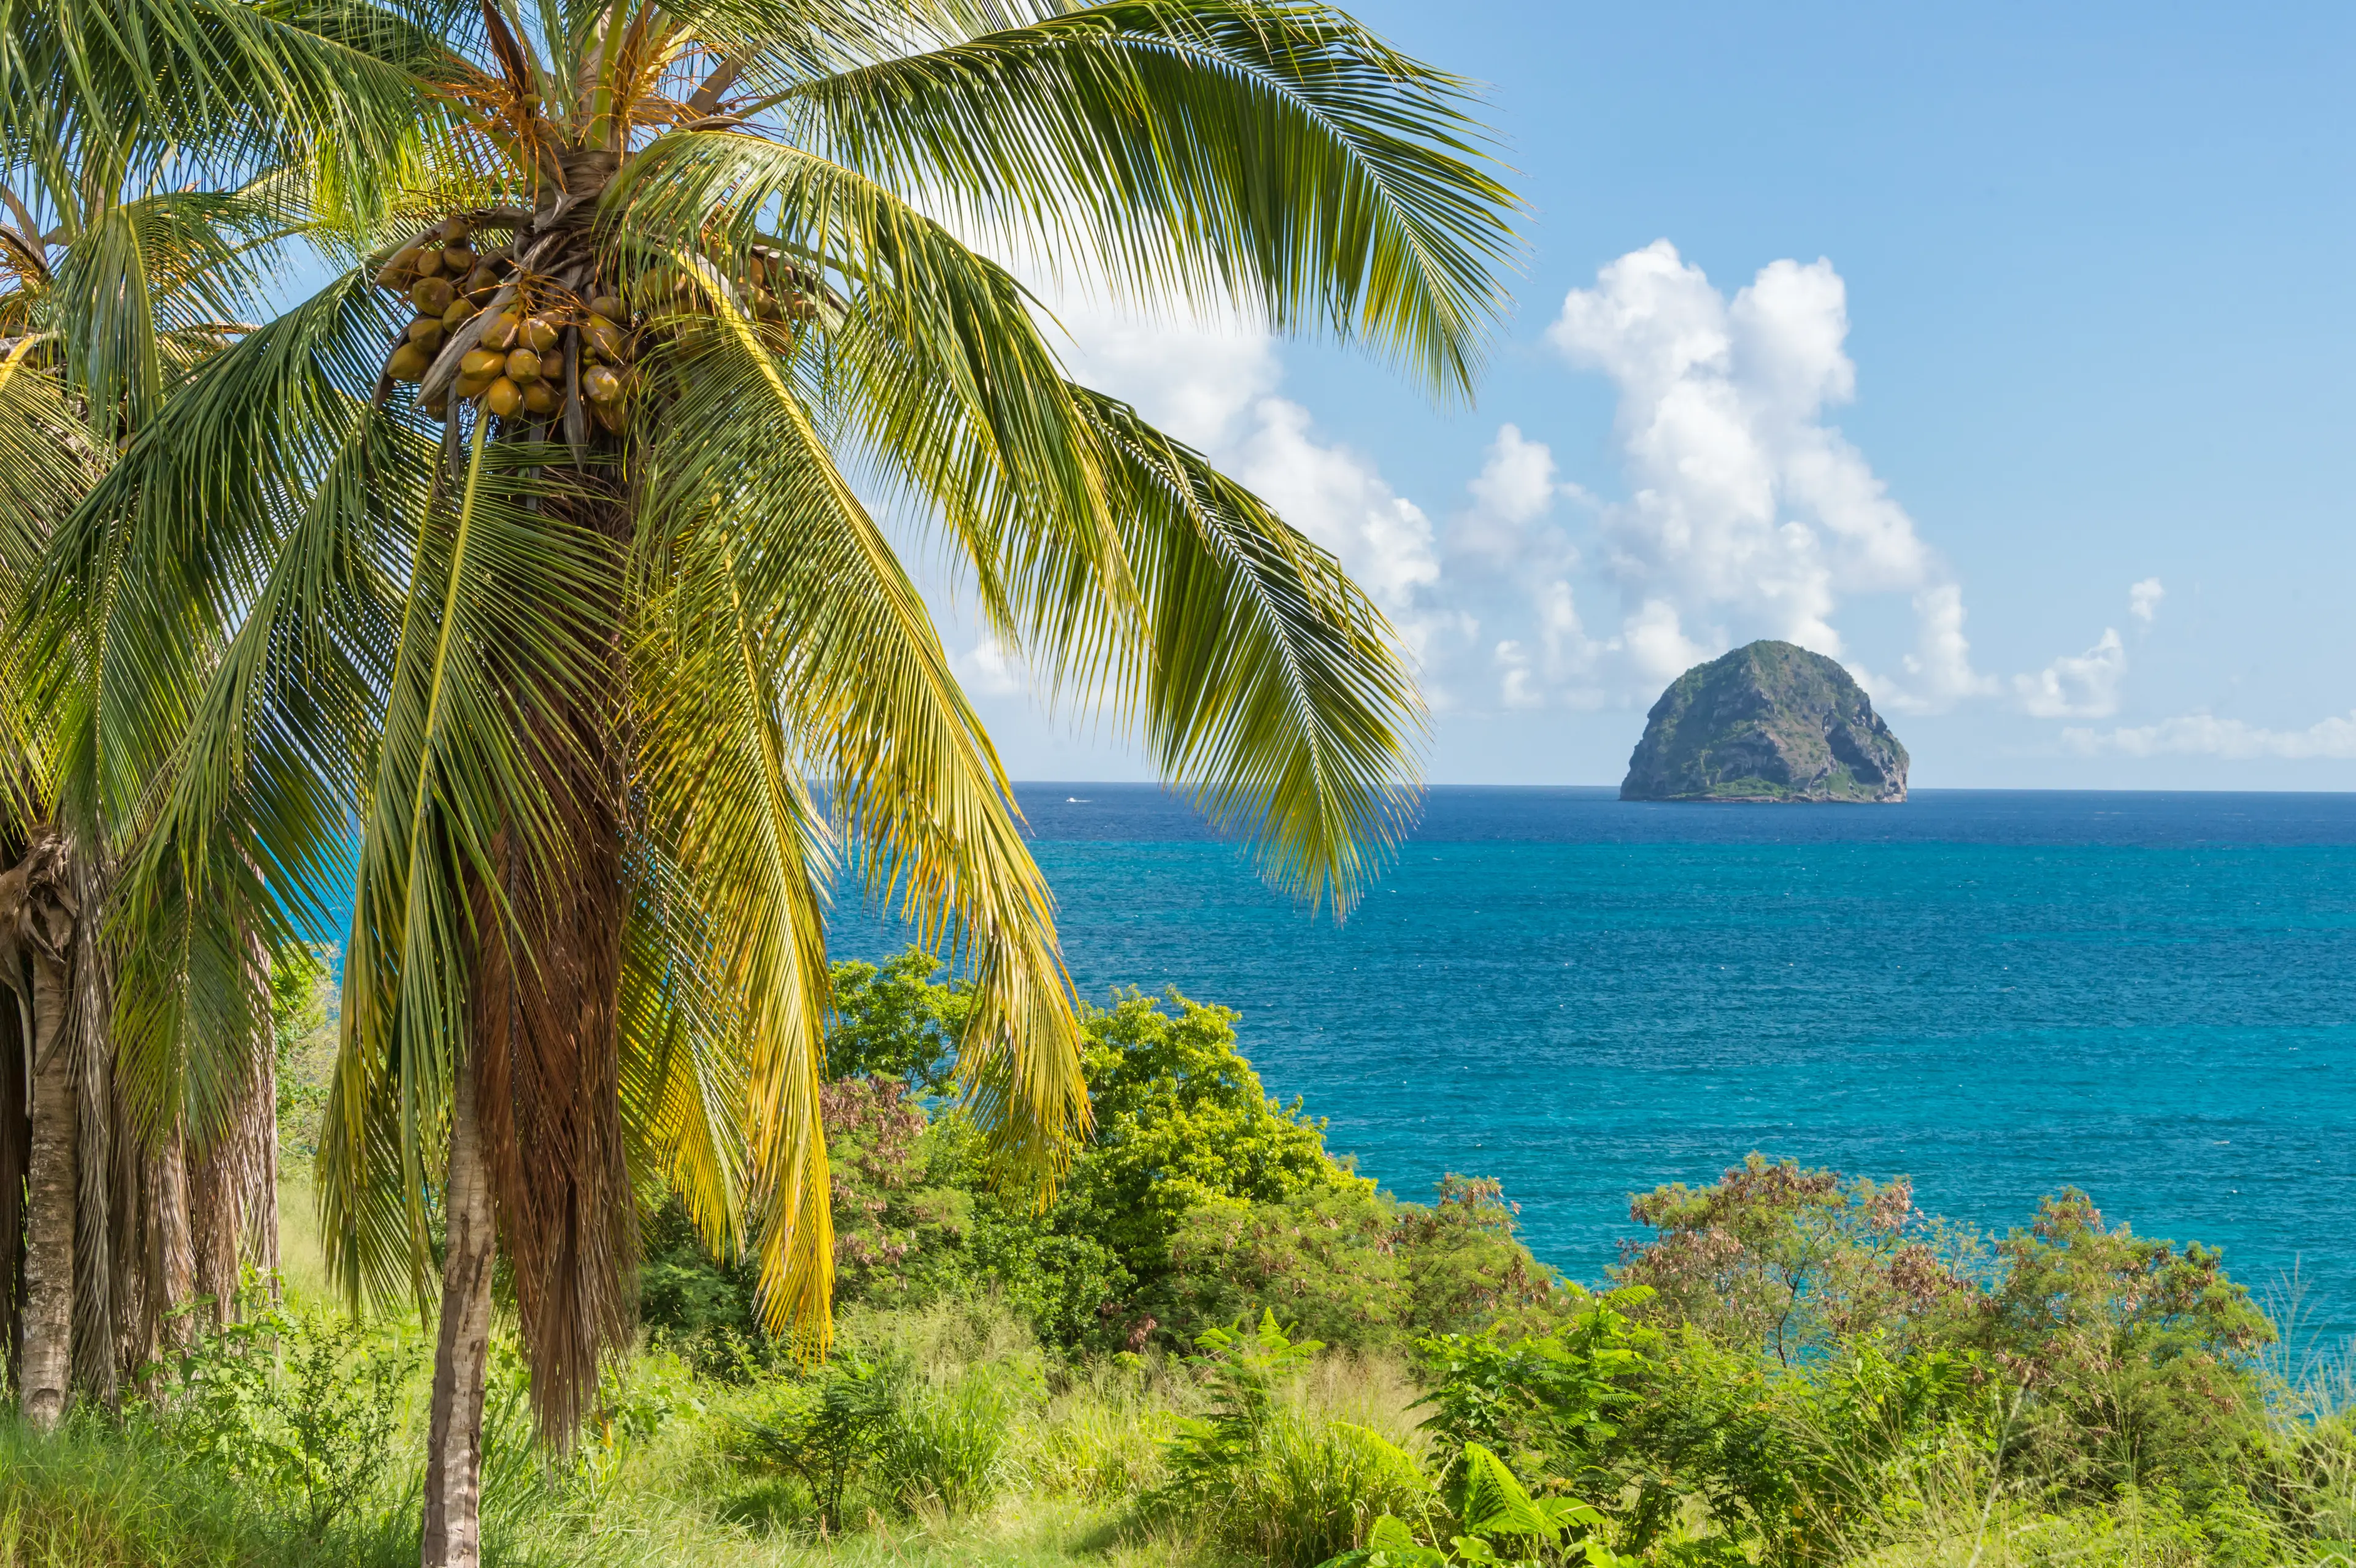 4-Day Family Relaxation and Culinary Adventure in Martinique, Caribbean